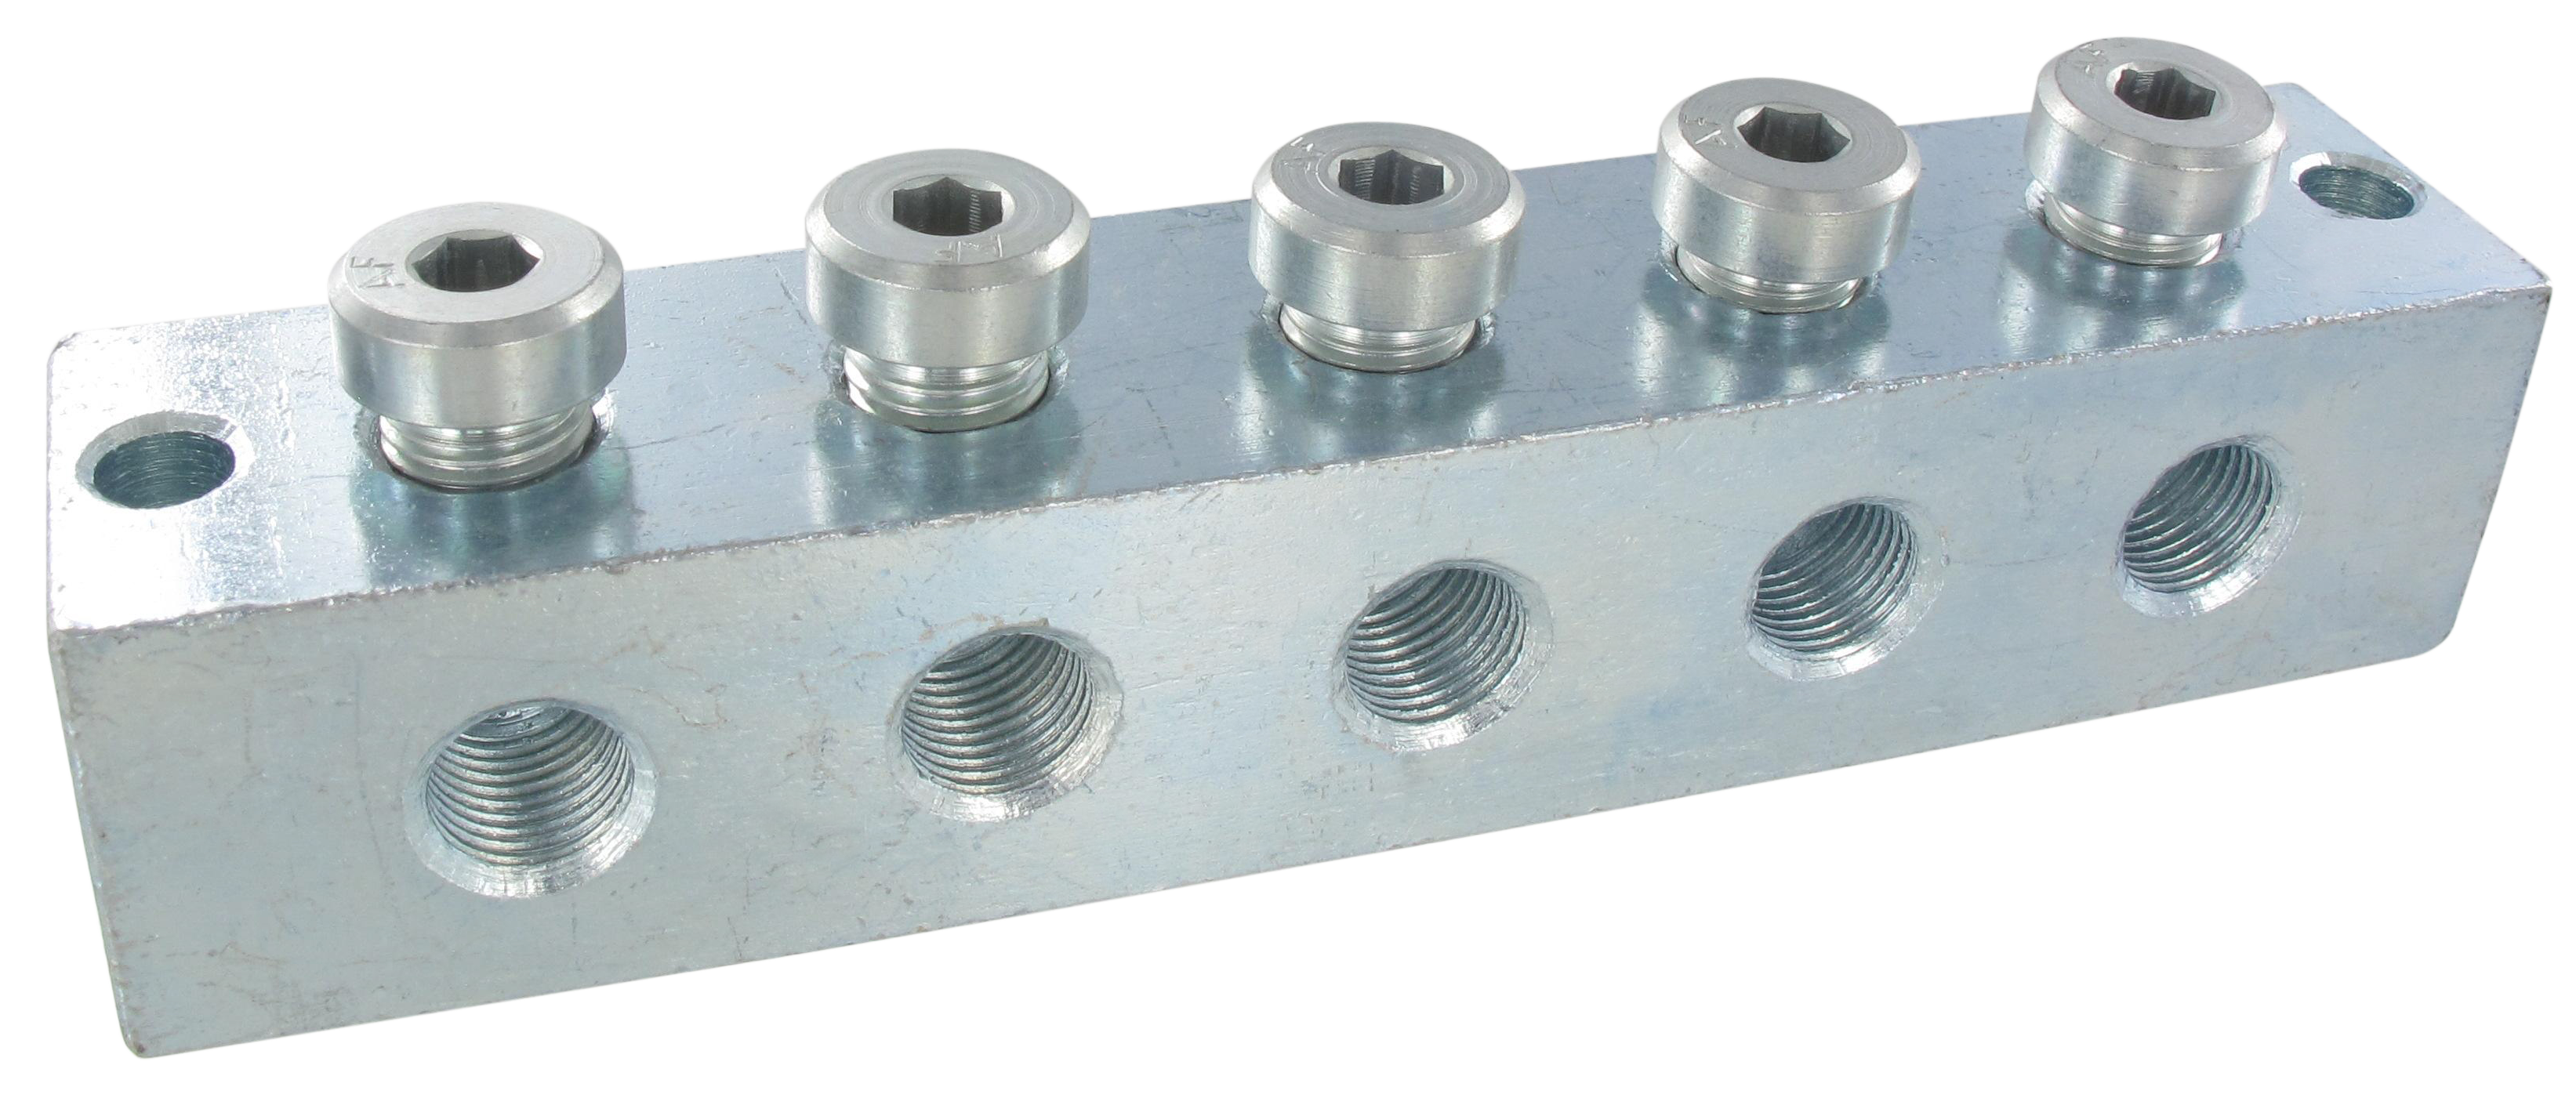 Threaded T-connector manifold M10x1 with 4 connections in galvanised steel